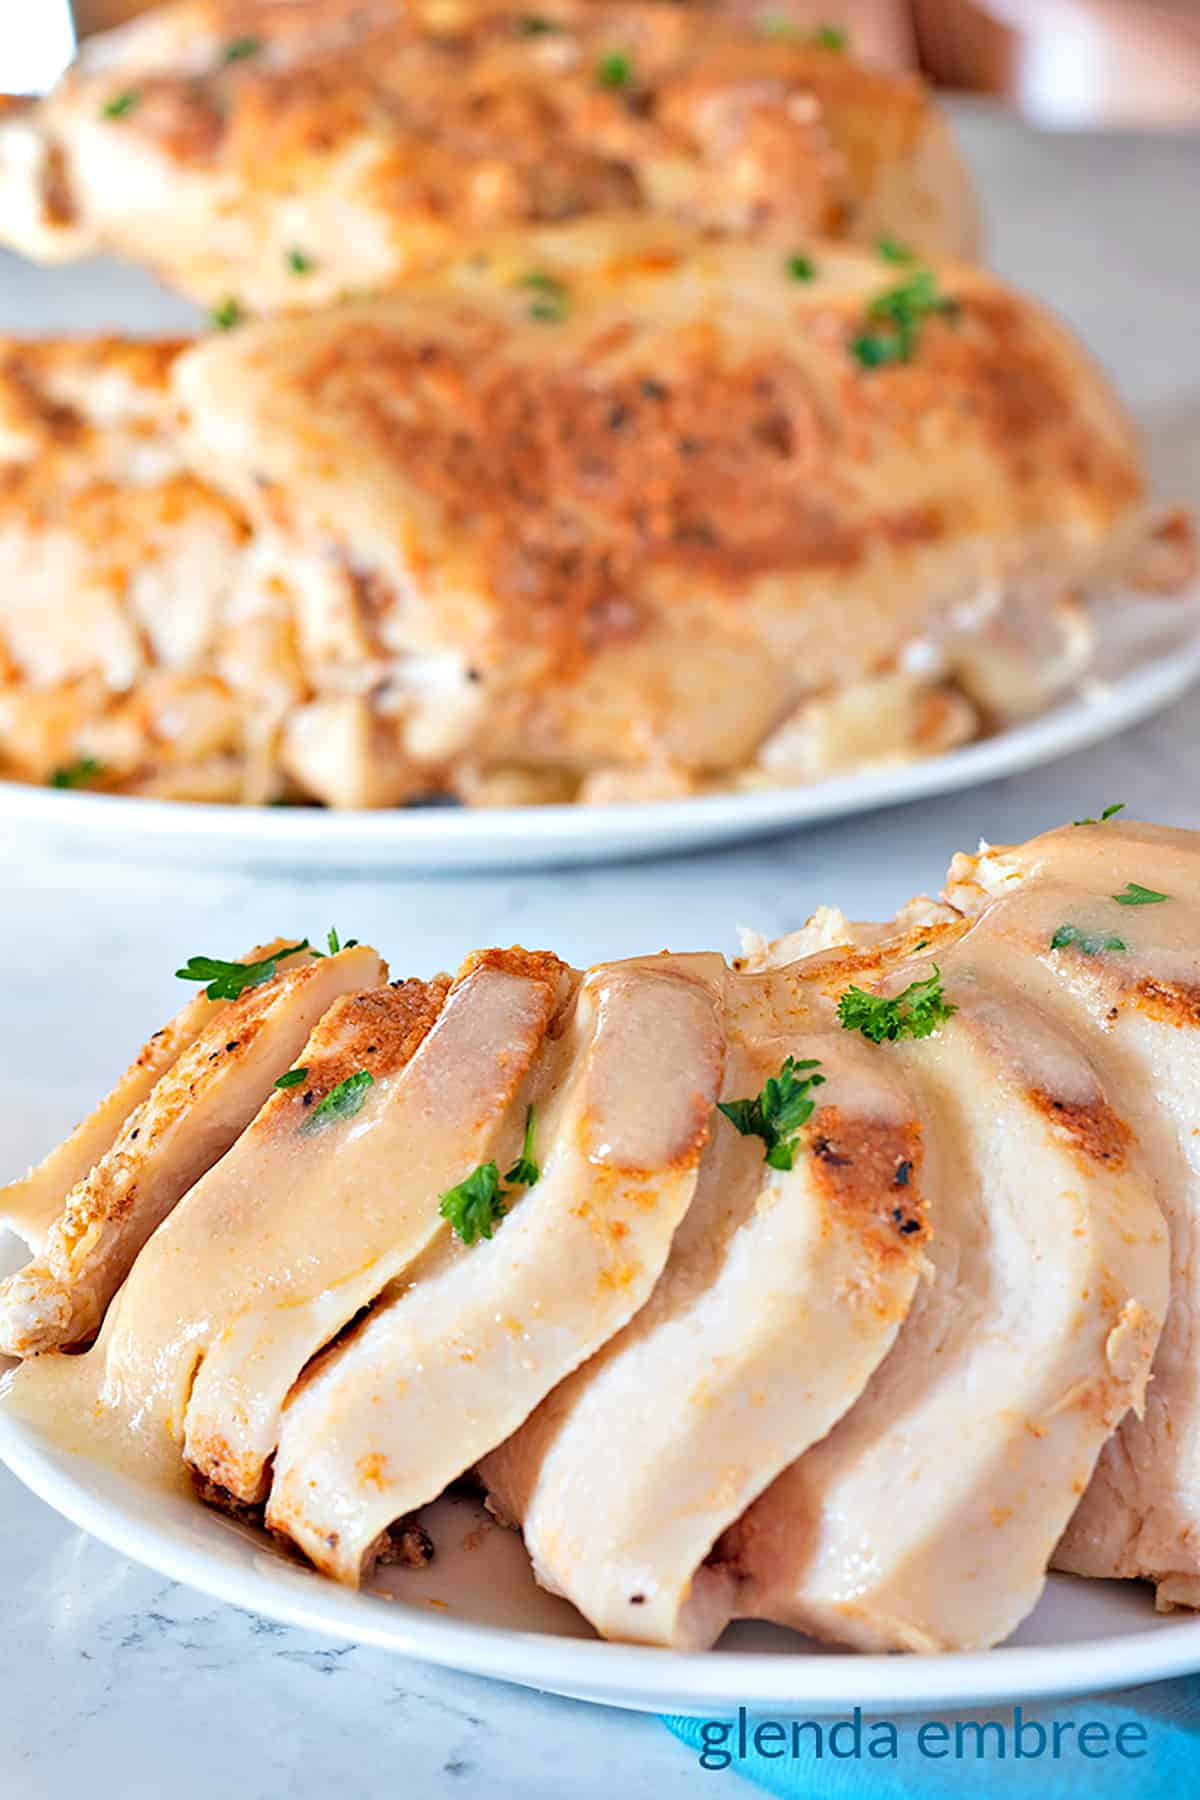 Slow Cooker Chicken Breasts sliced on a plate with a platter of slow cooker chicken breasts in the background